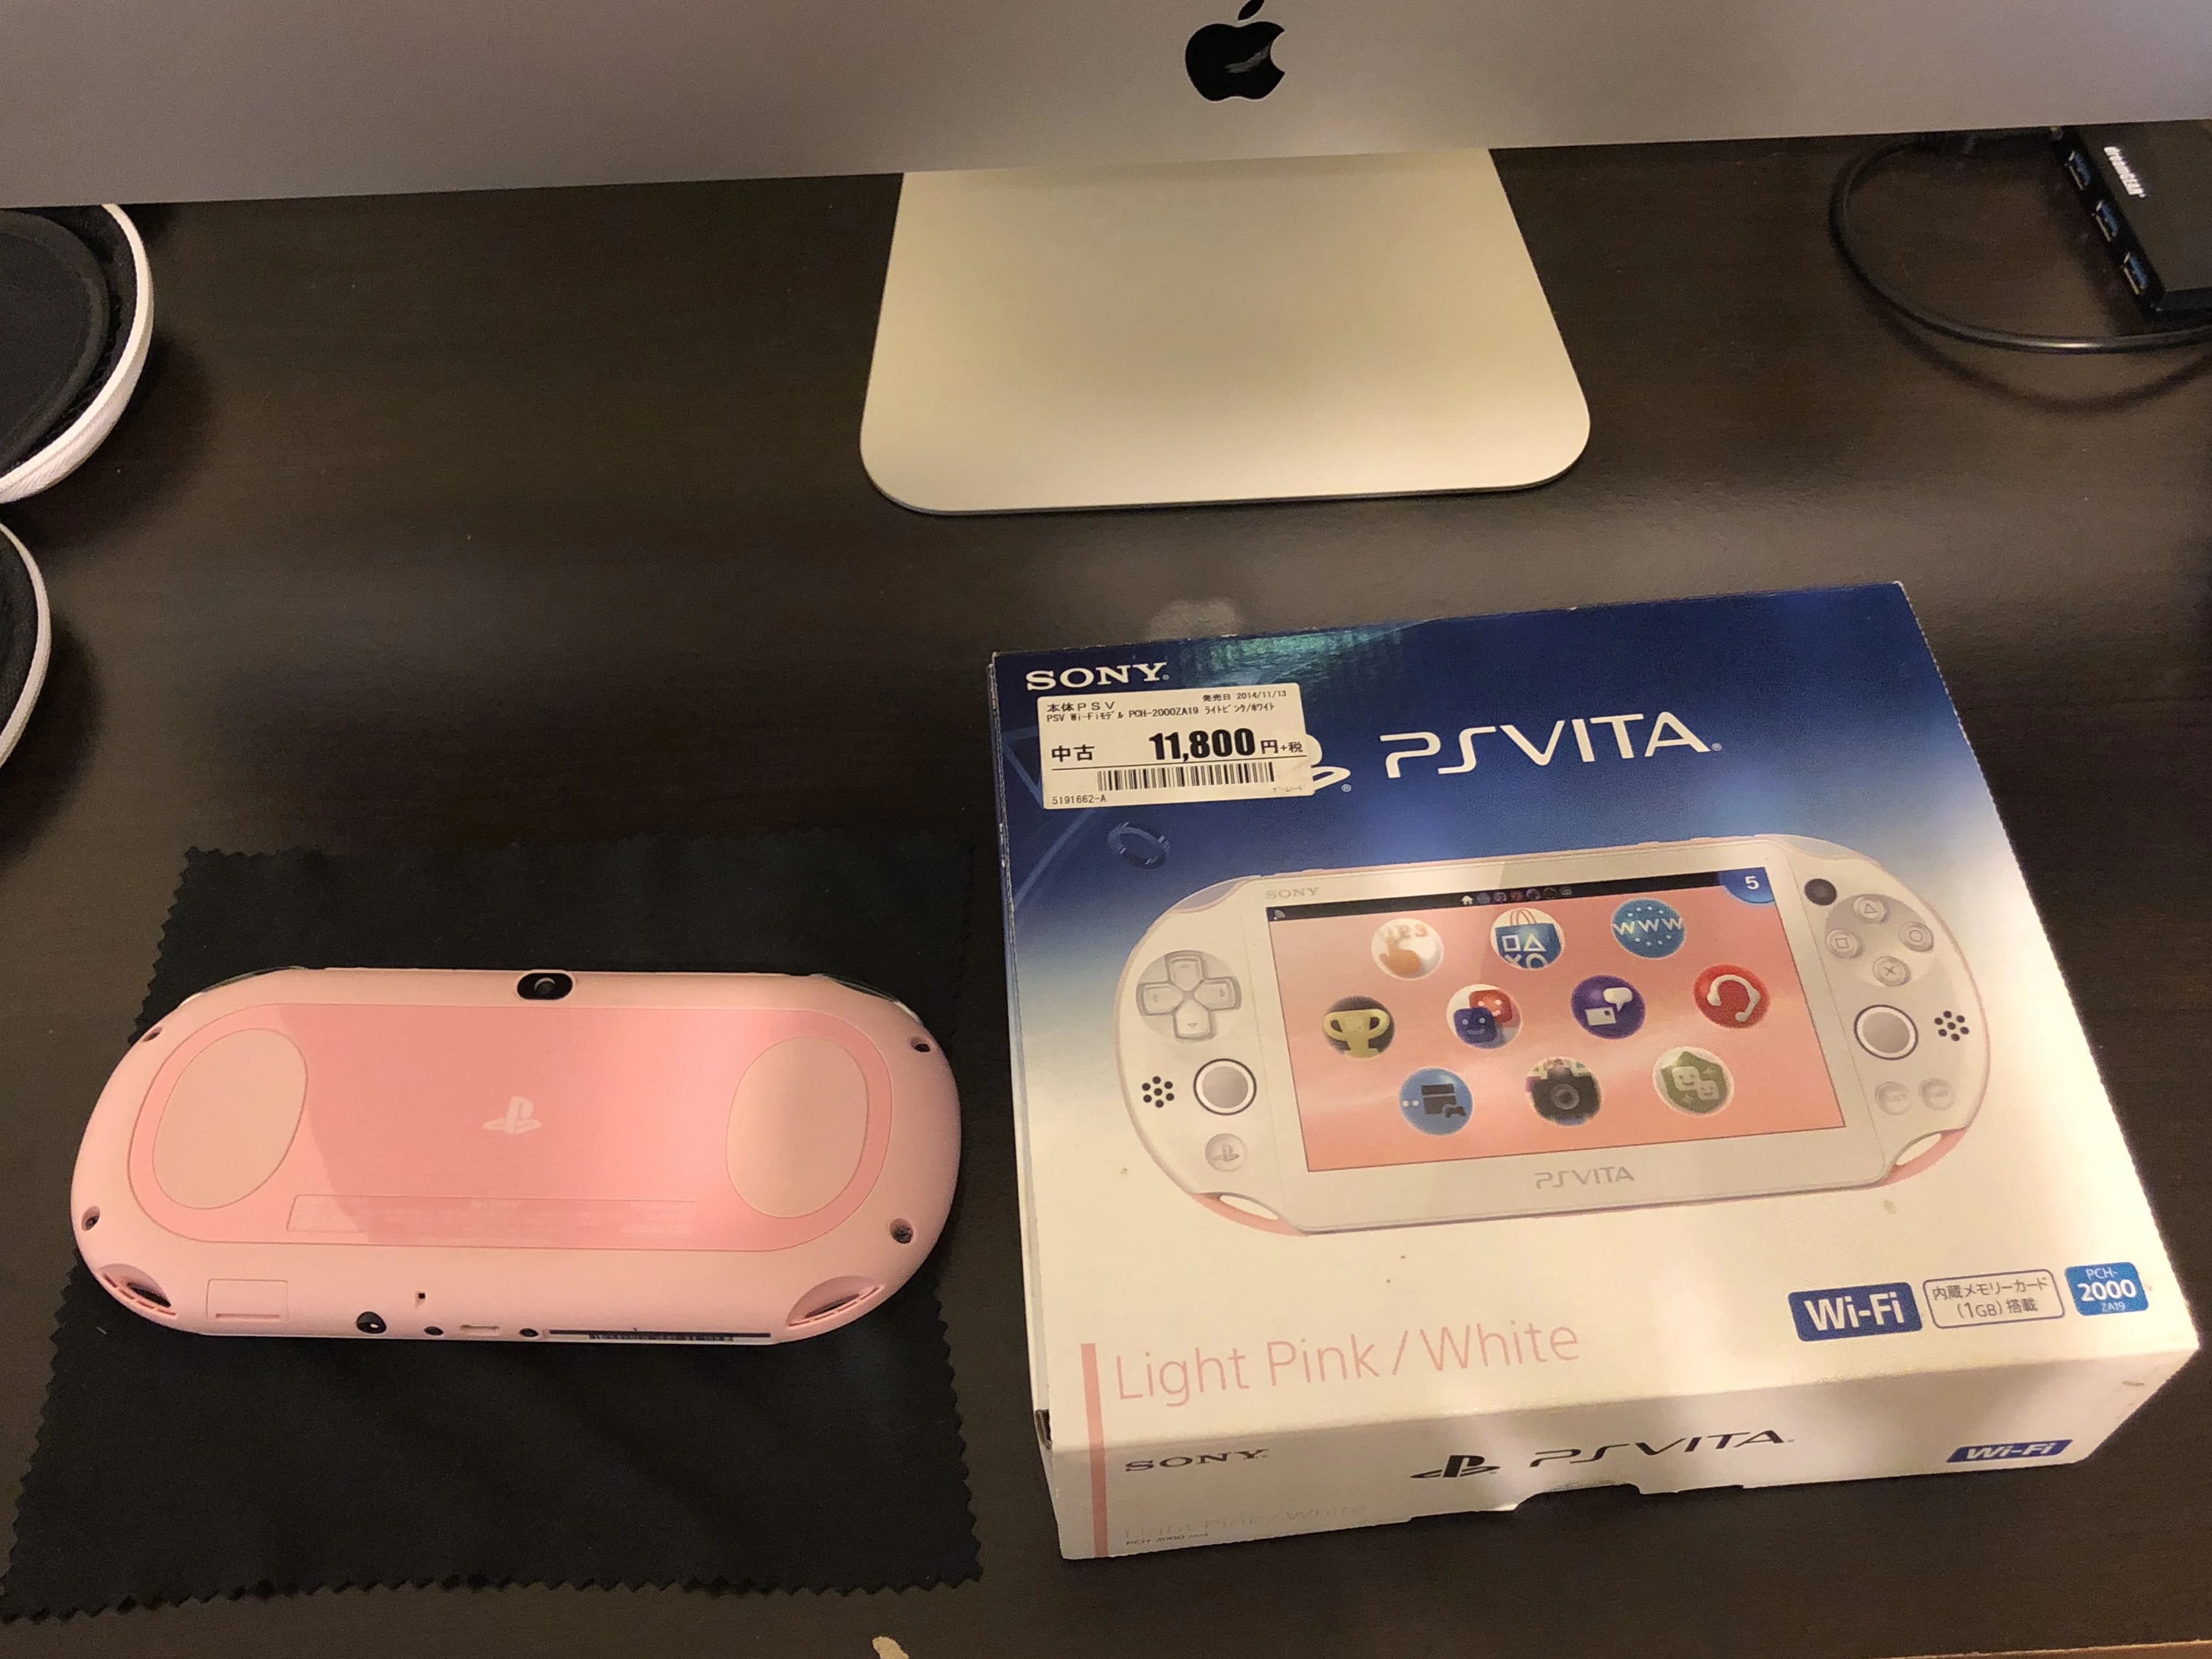  Sony PS Vita Slim Pink and White Console